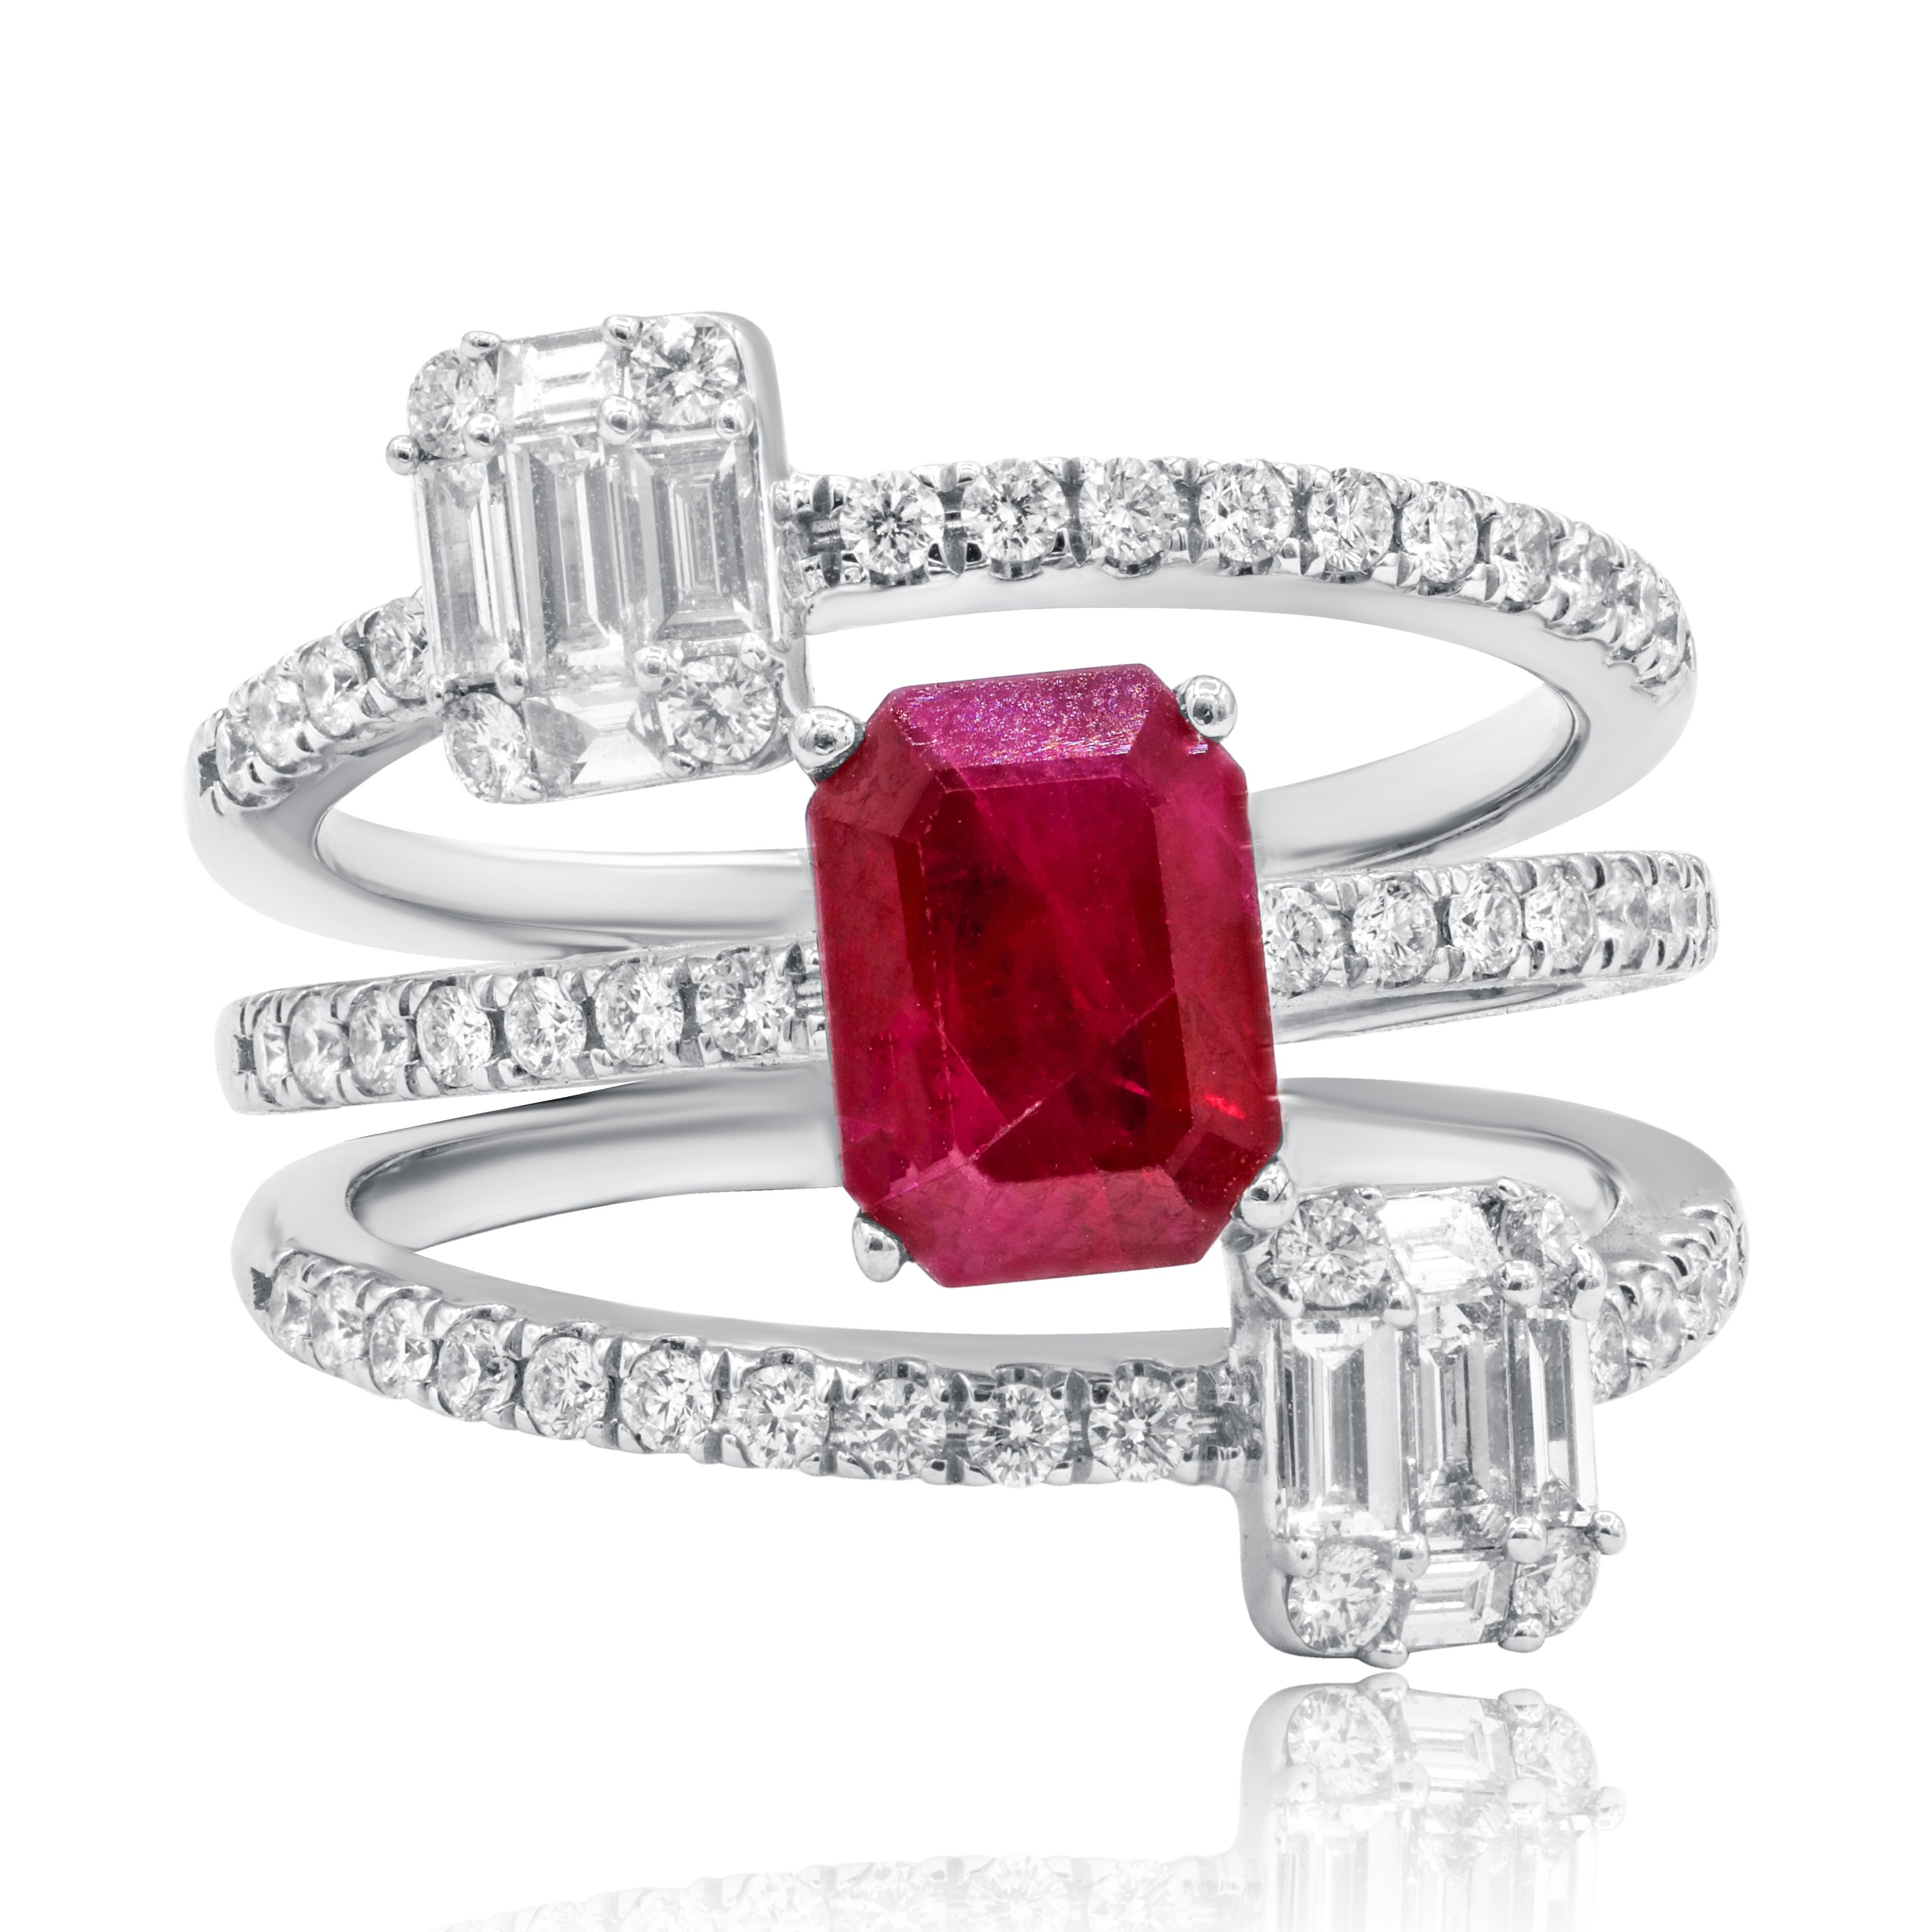 18K white gold ring features 1.04 ct round and emerald cut diamonds and 1.88 ct emerald cut ruby.
Finger size 7